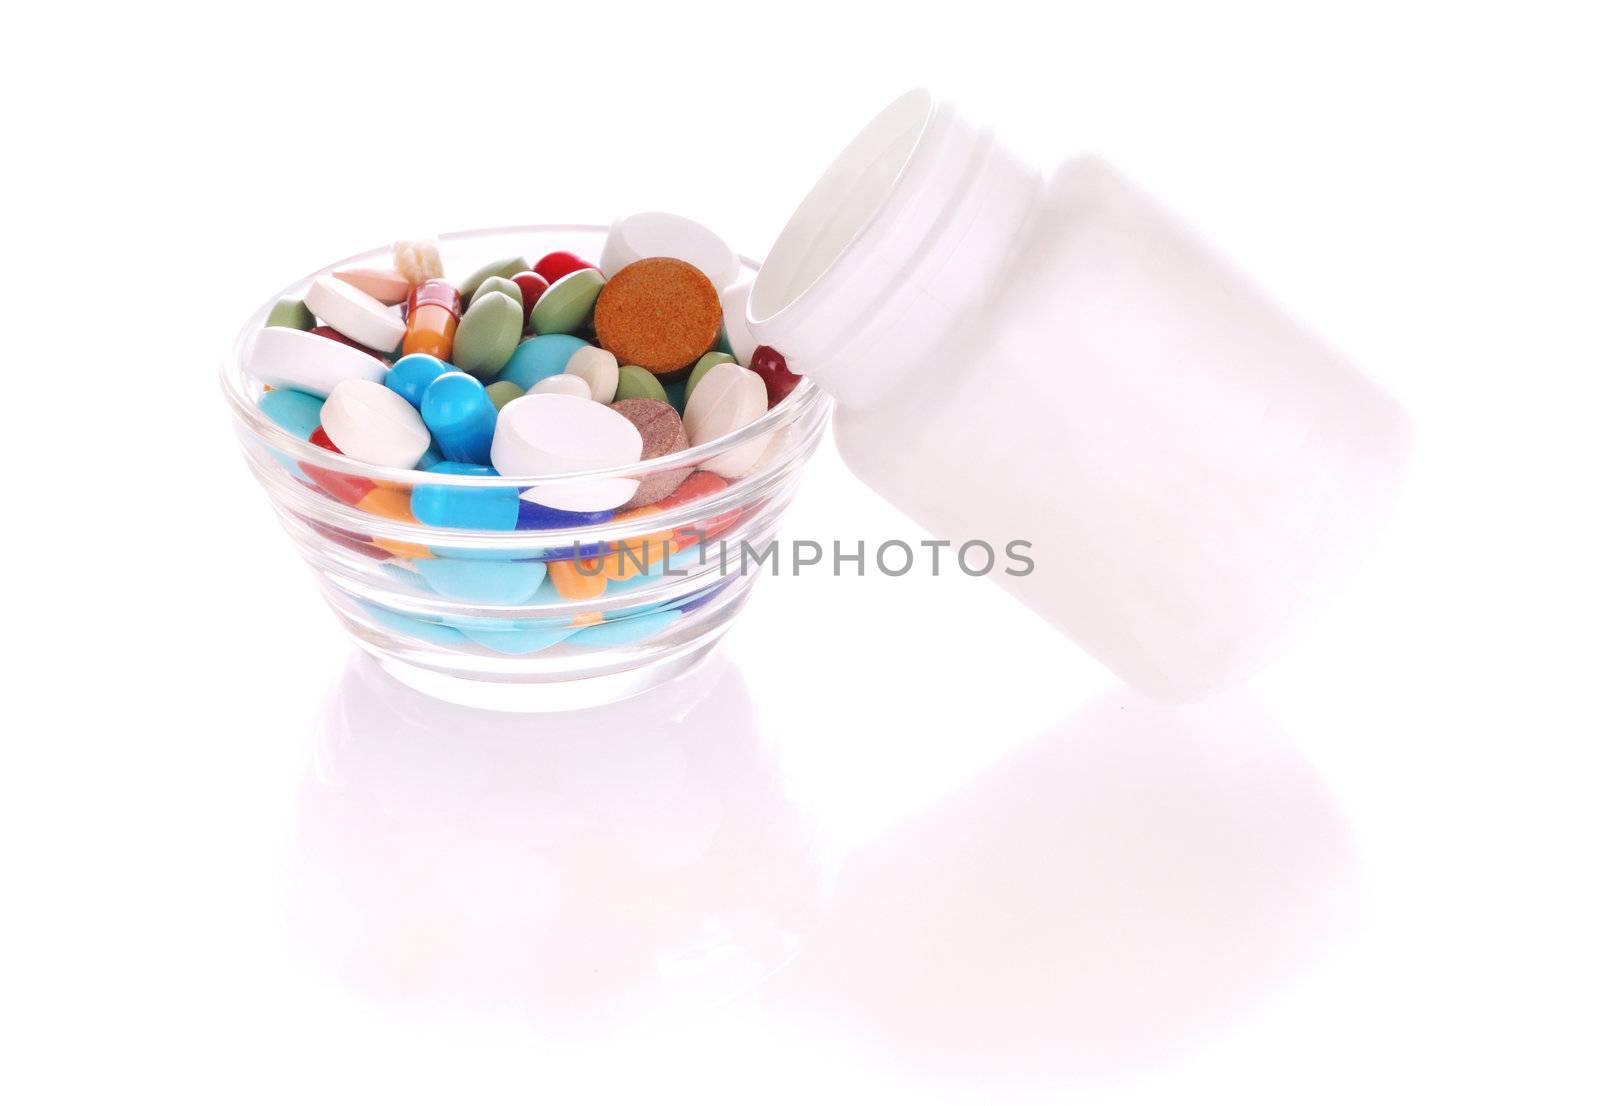 Bottle and saucer with many-colored pills by iryna_rasko